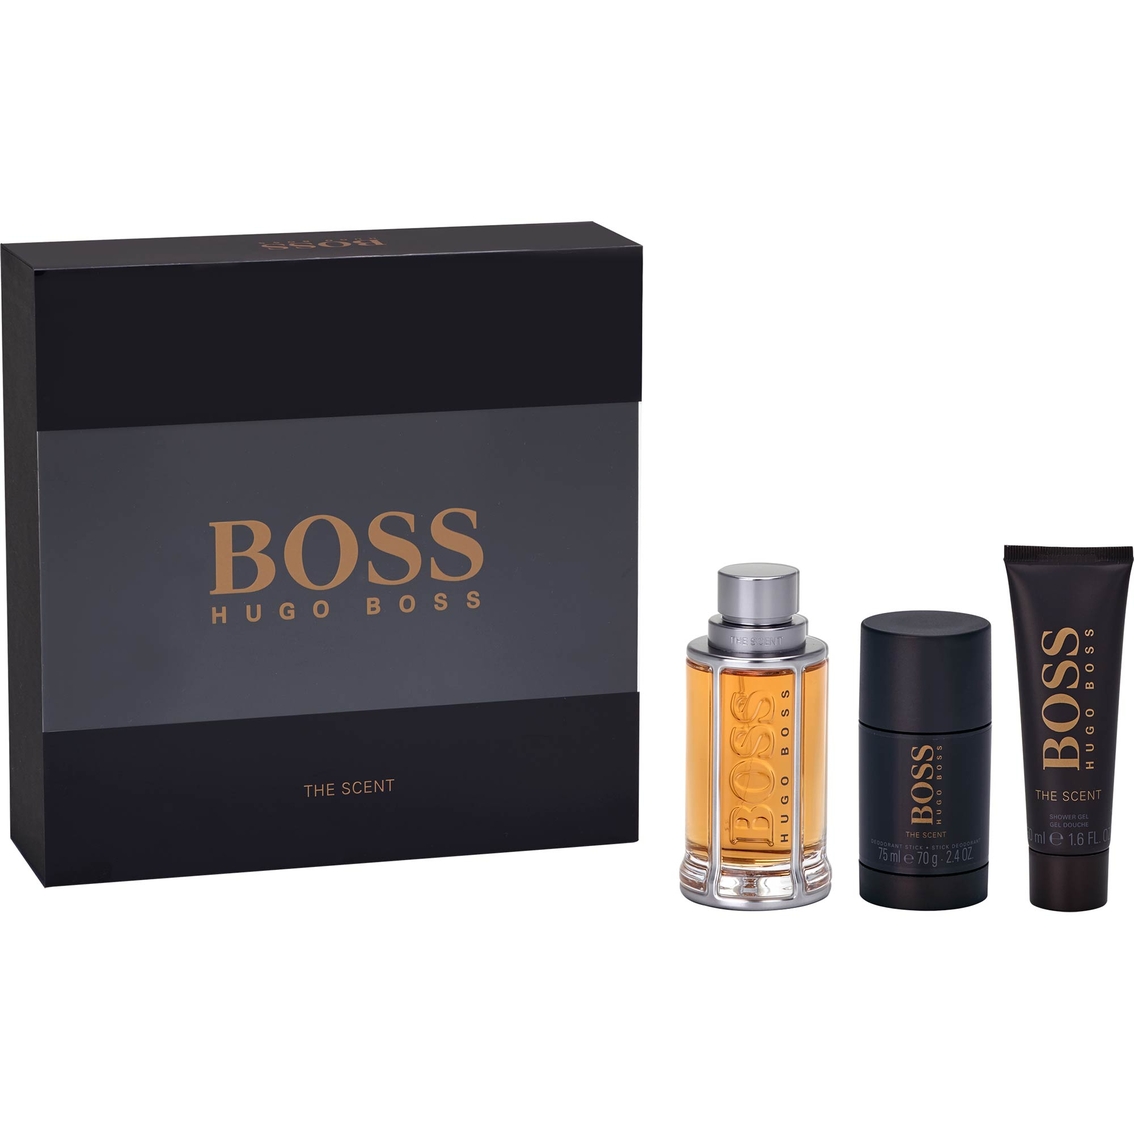 Hugo Boss The Scent 3 Pc. Gift Set | Gifts Sets For Him | Beauty ...